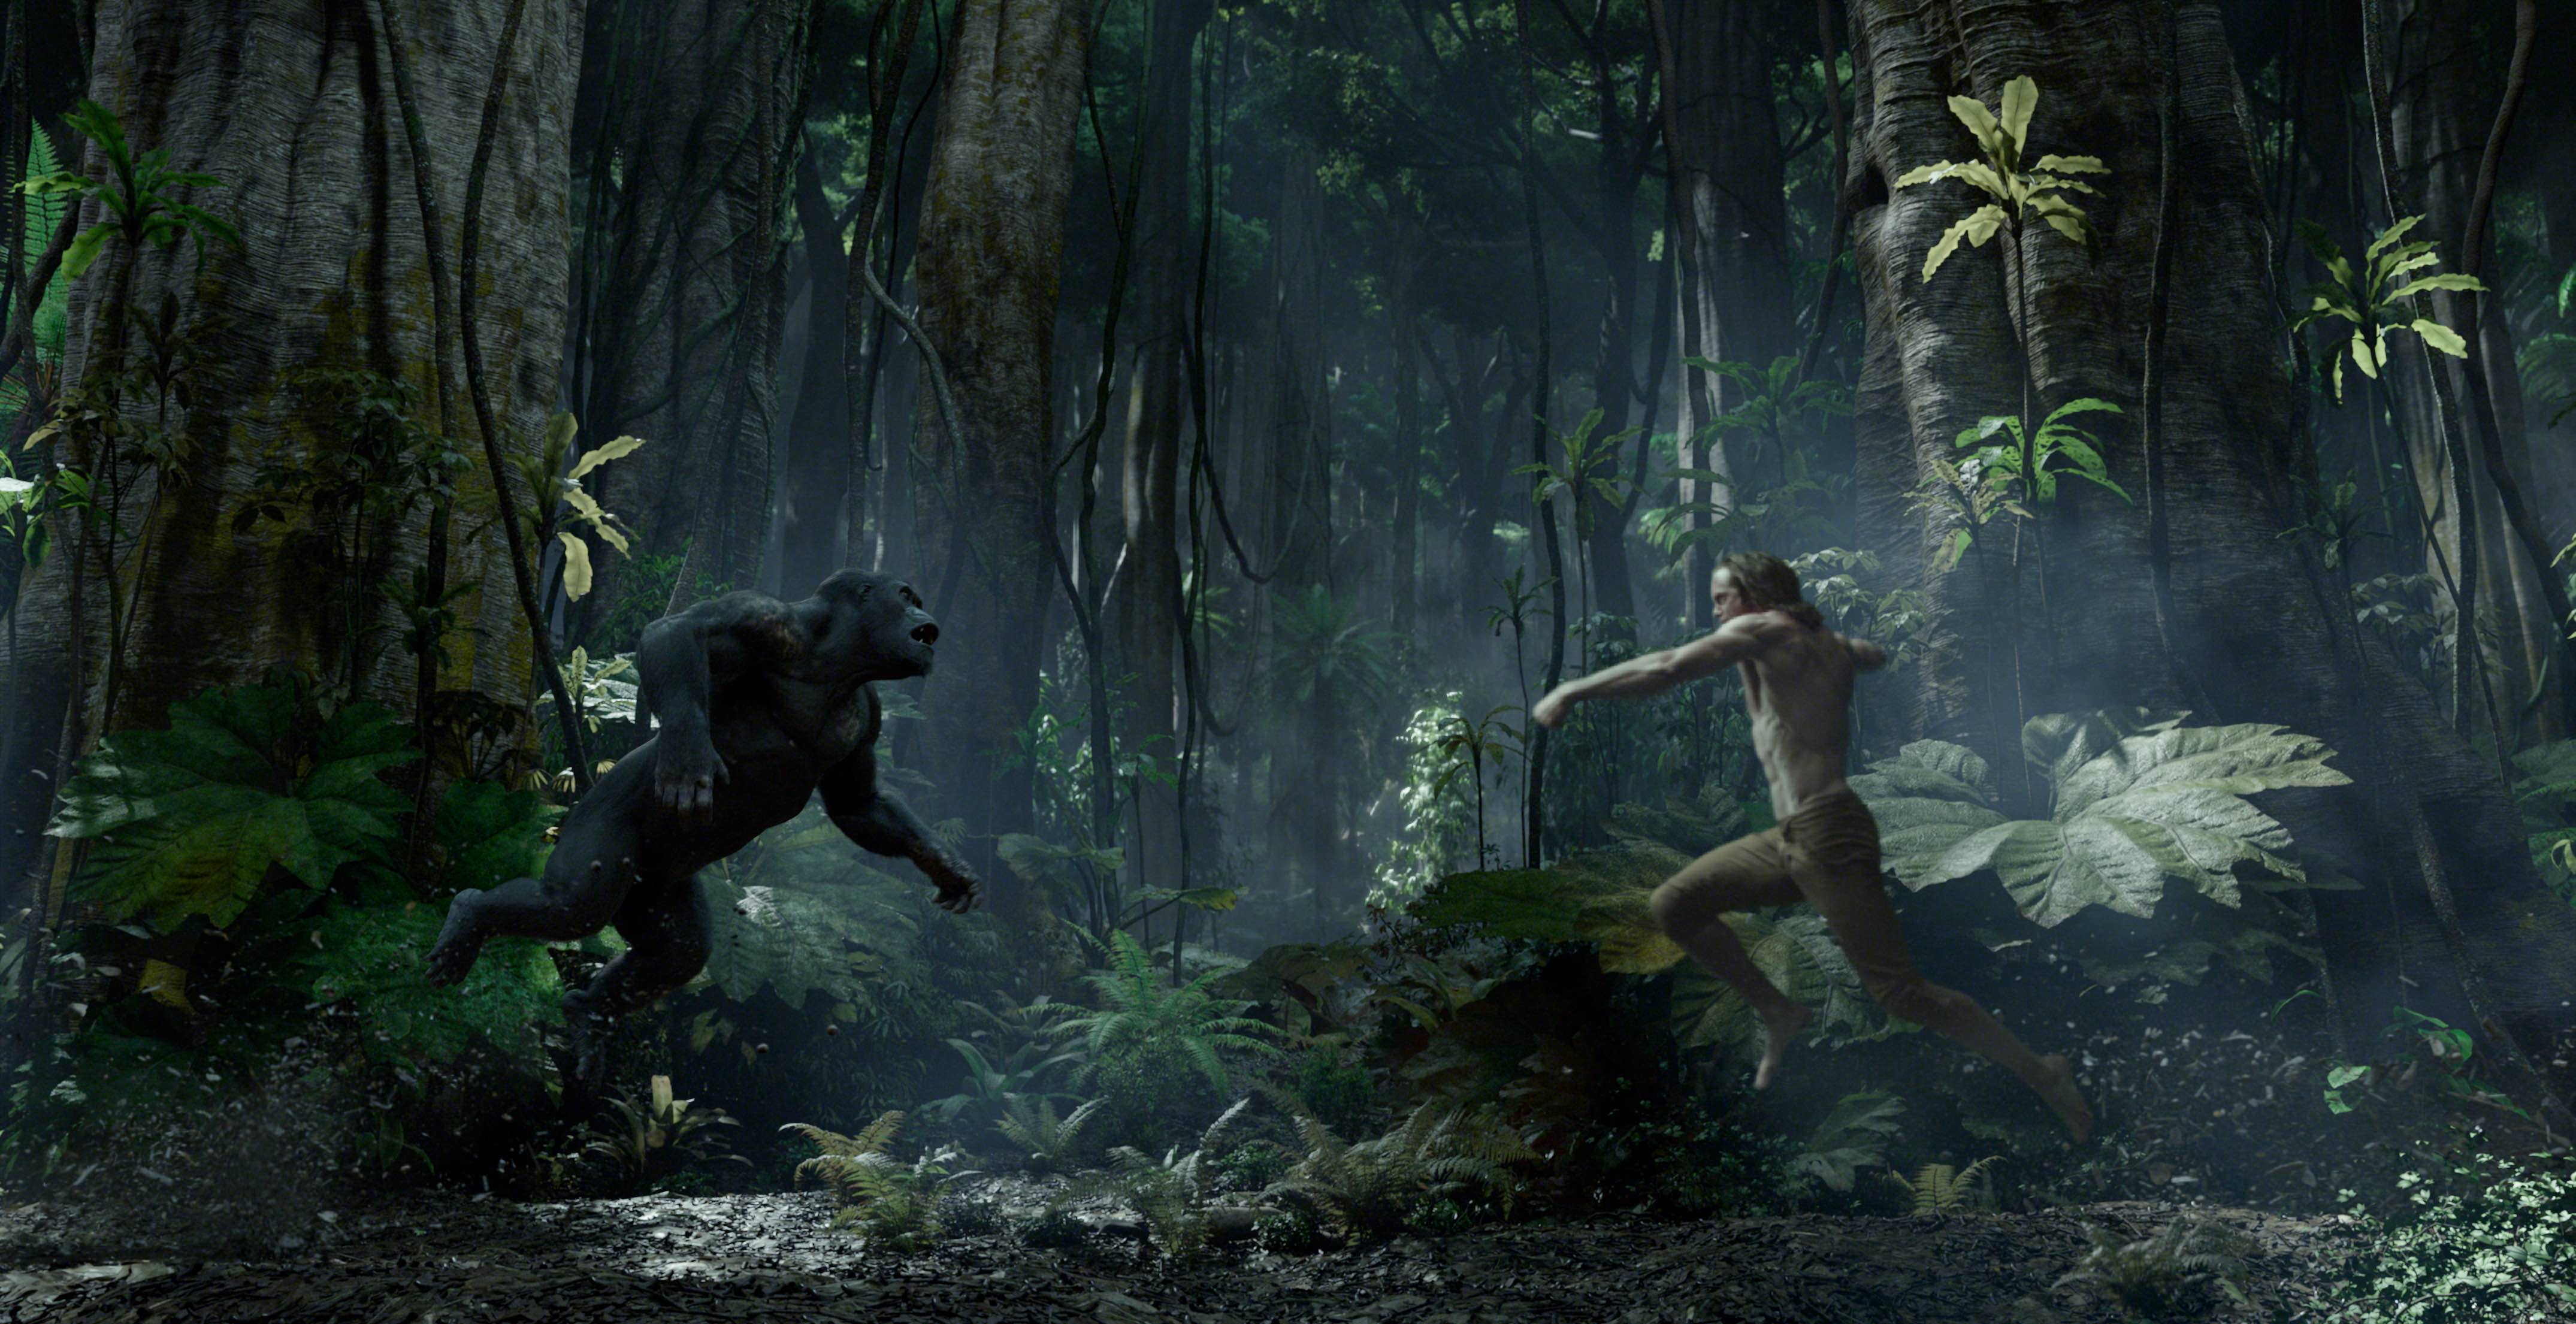 tarzan and an ape charging towards each other in a jungle